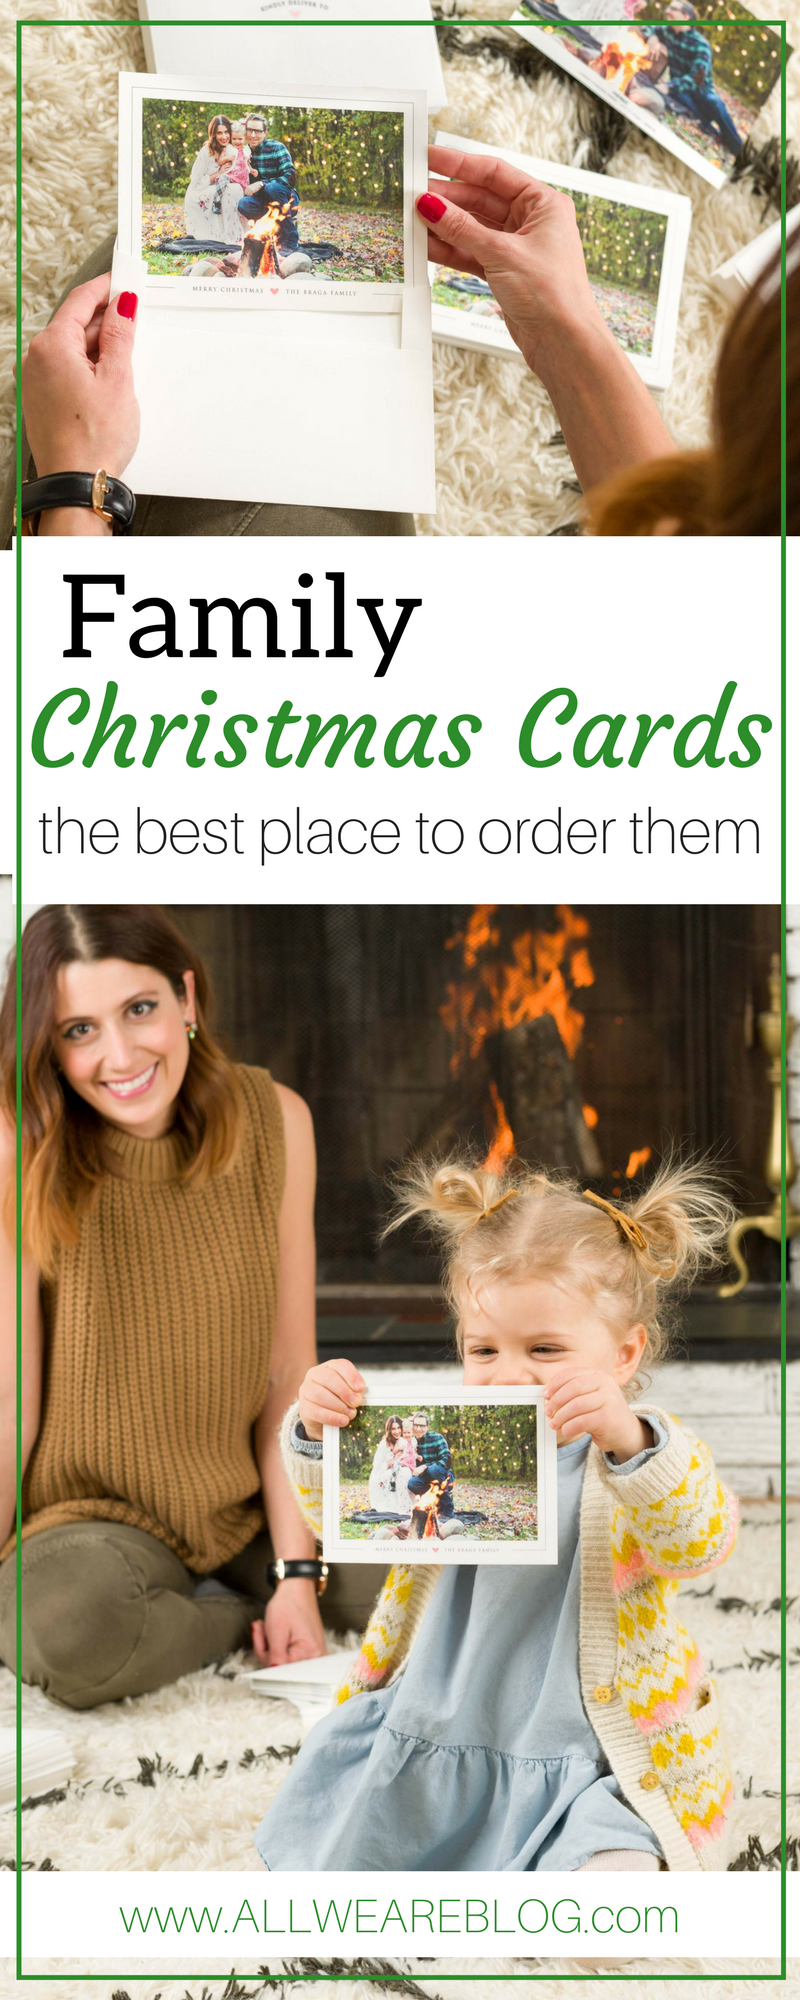 family christmas cards and the best place to order them on allweareblog.com